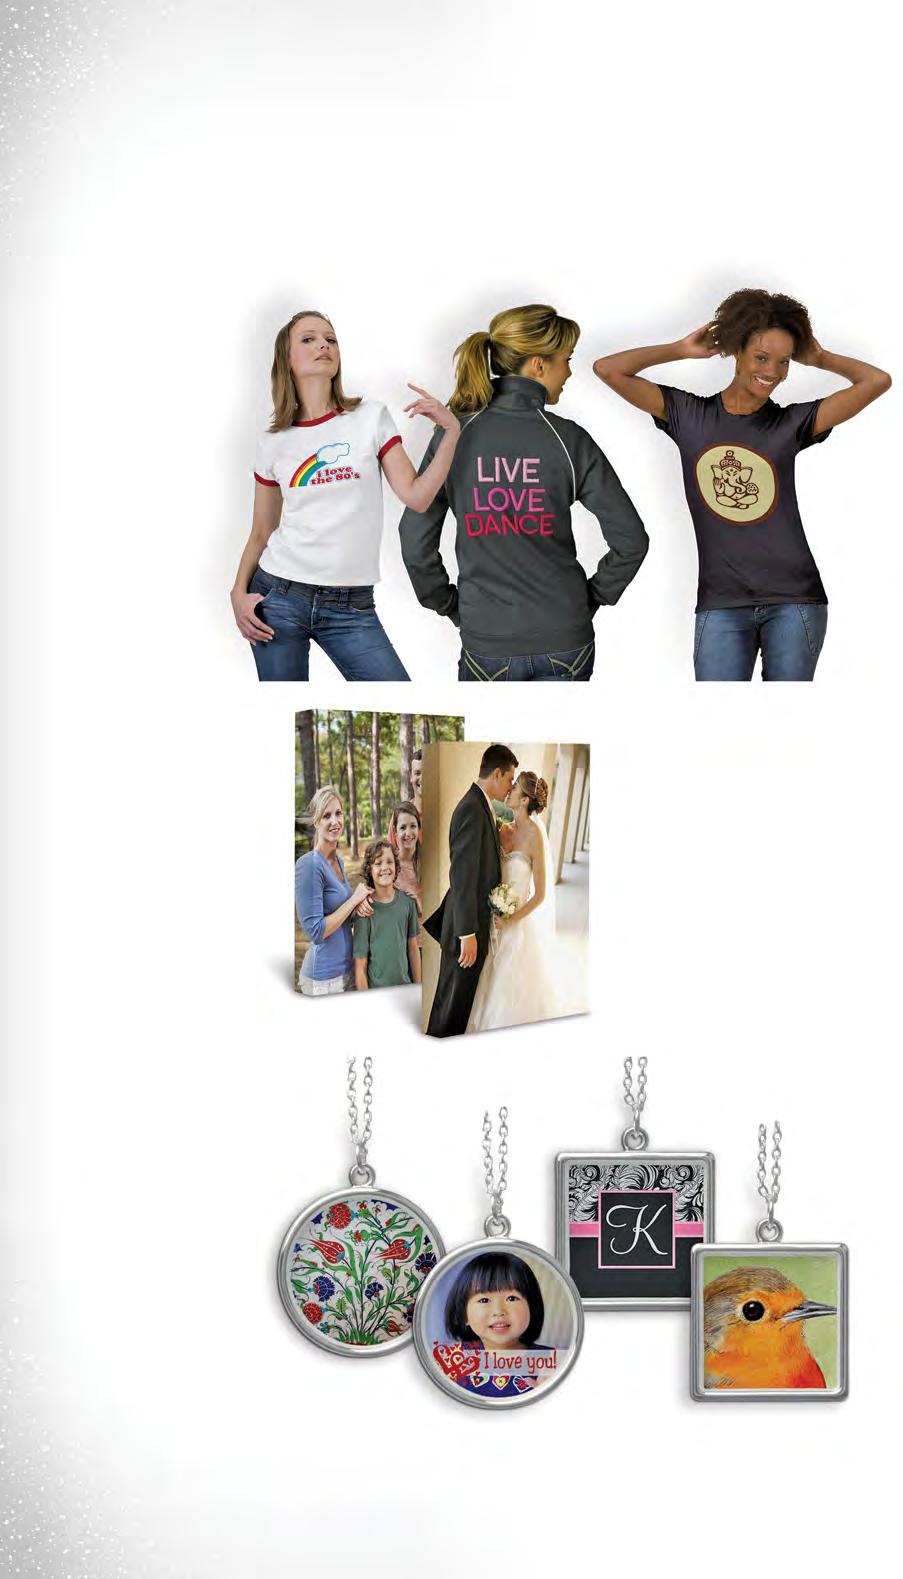 Choose from eyecatching aprons, tees, shoes all kinds of apparel. Thanks to that special Zazzle touch, it s sure to become her favorite. Shirts starting at $14.95. Create your own!